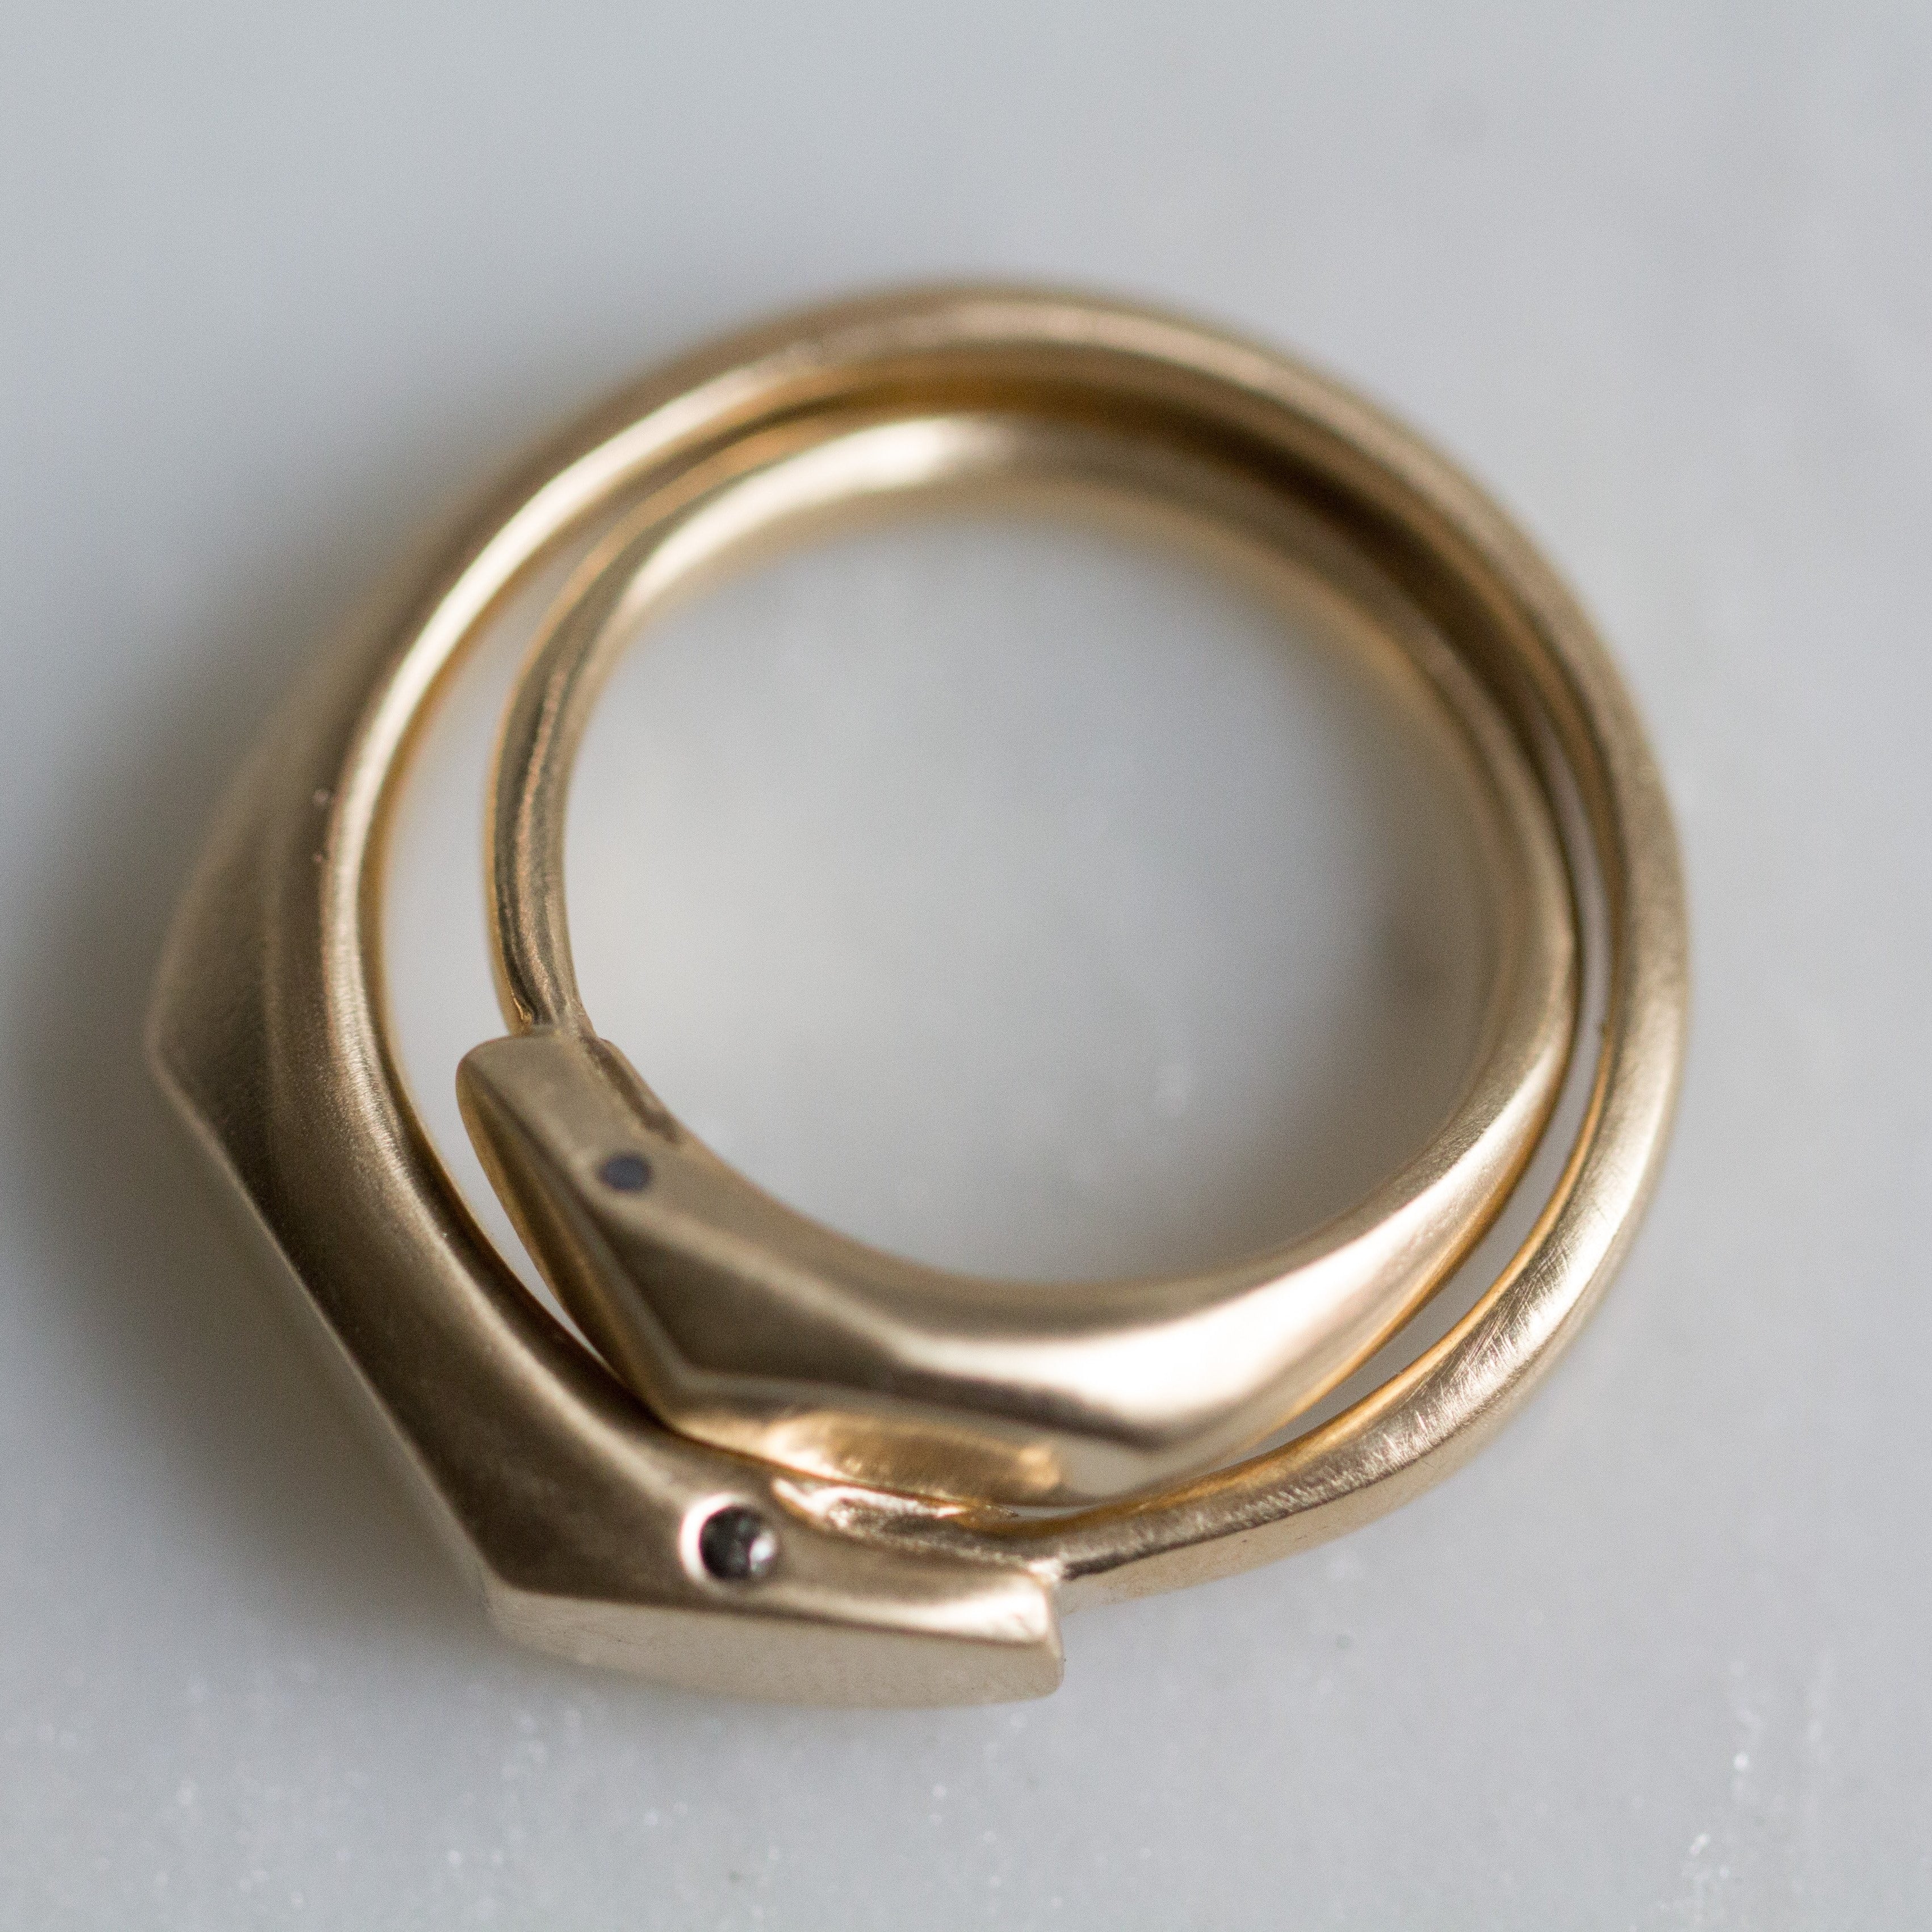 12th HOUSE JEWELRY RING Ouroboros Rings in solid gold